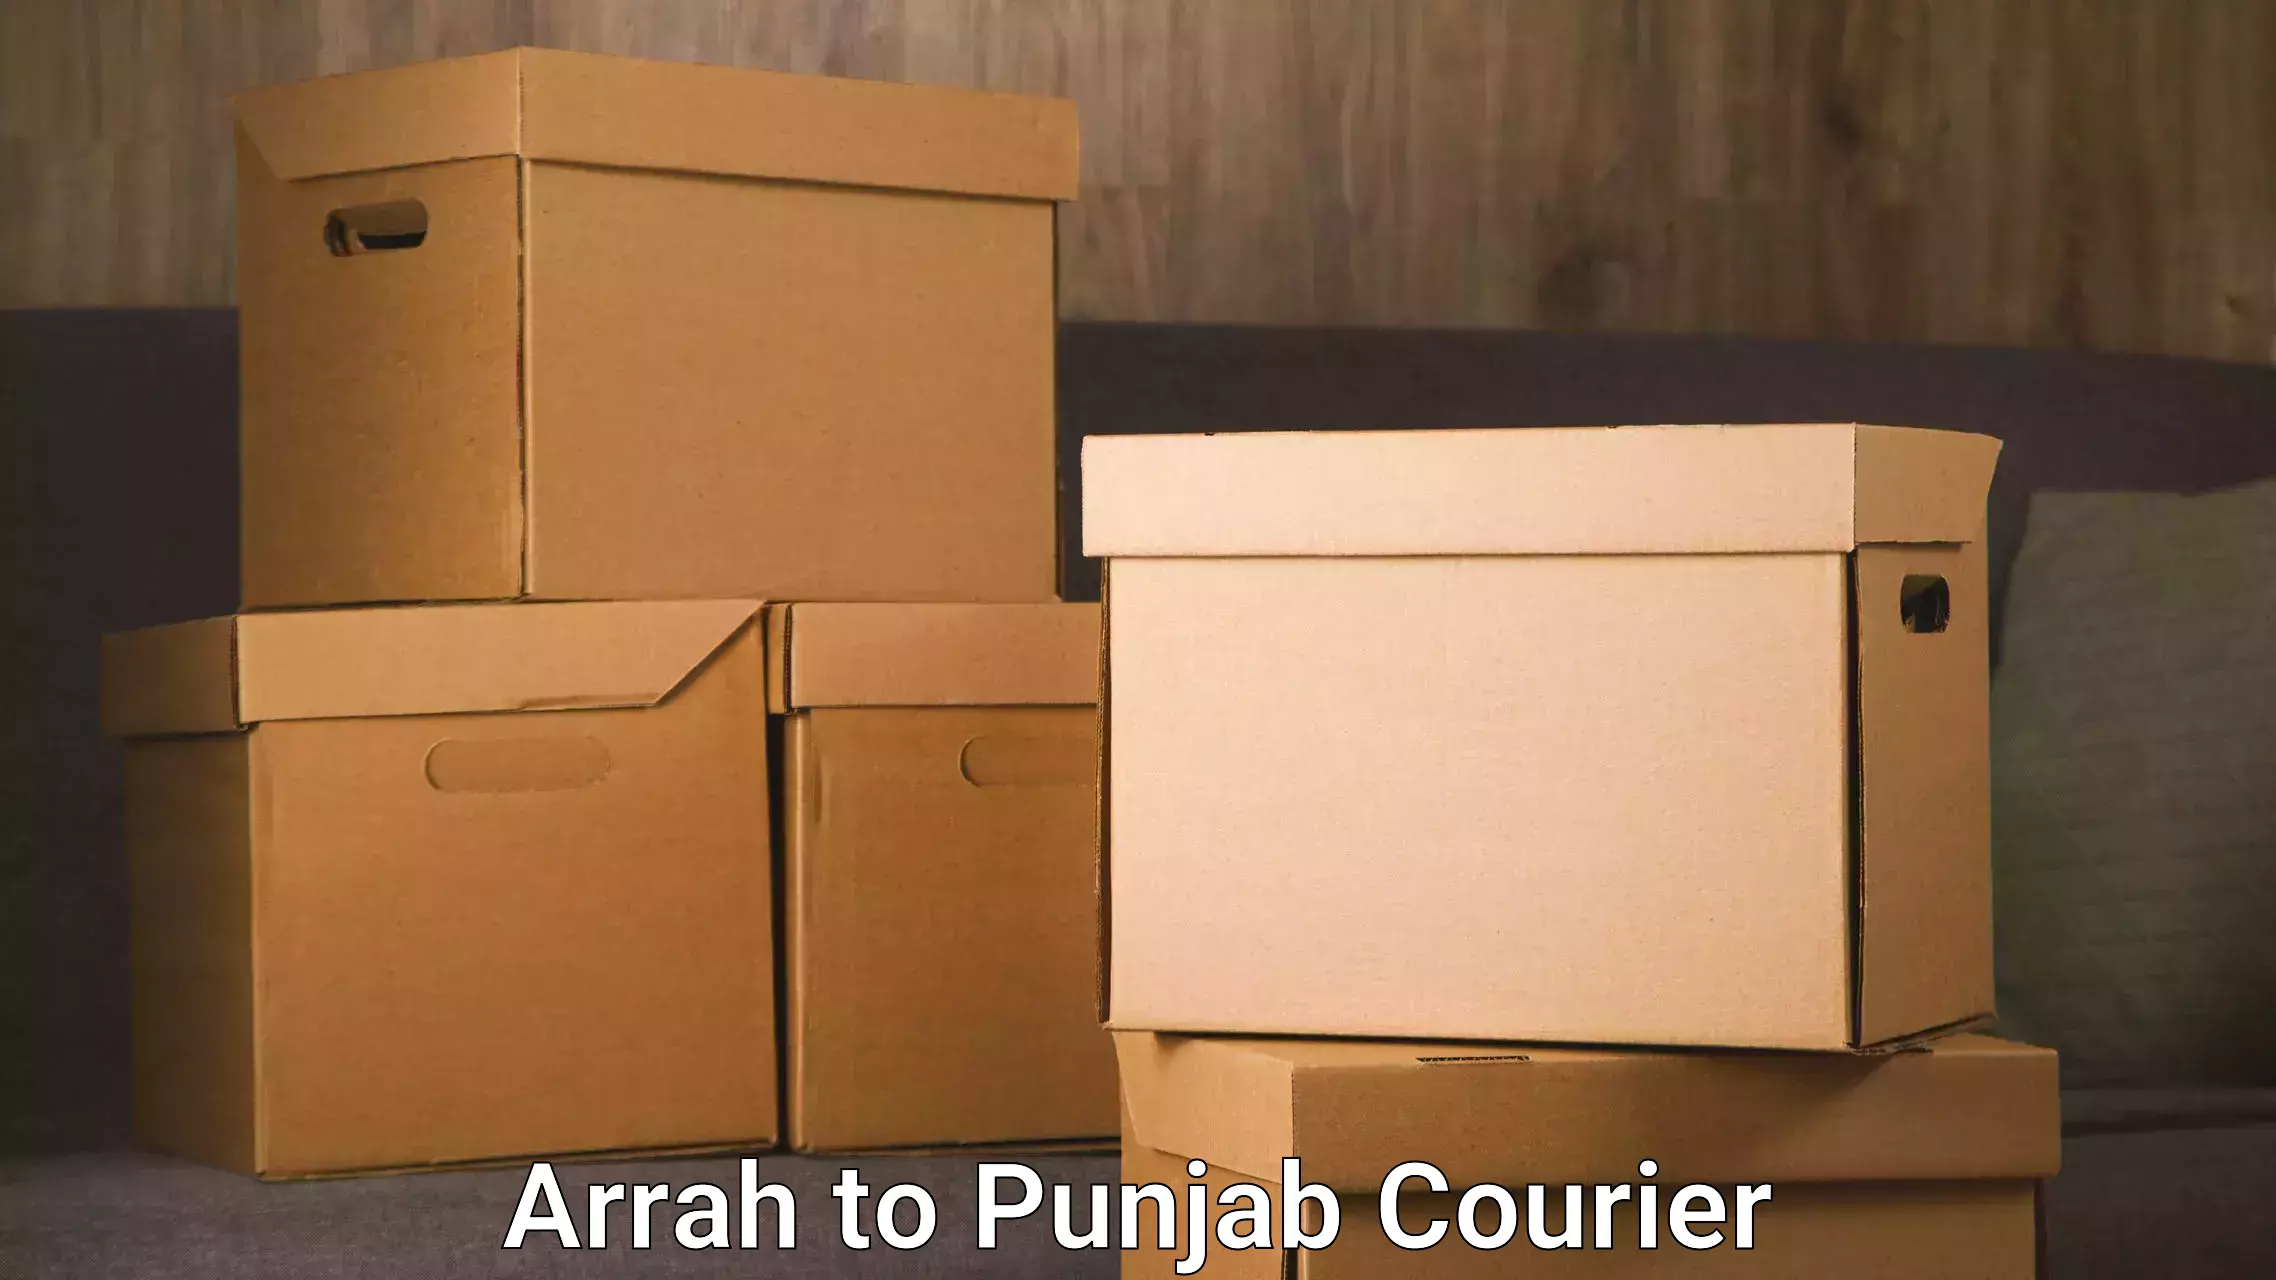 Moving and packing experts Arrah to Punjab